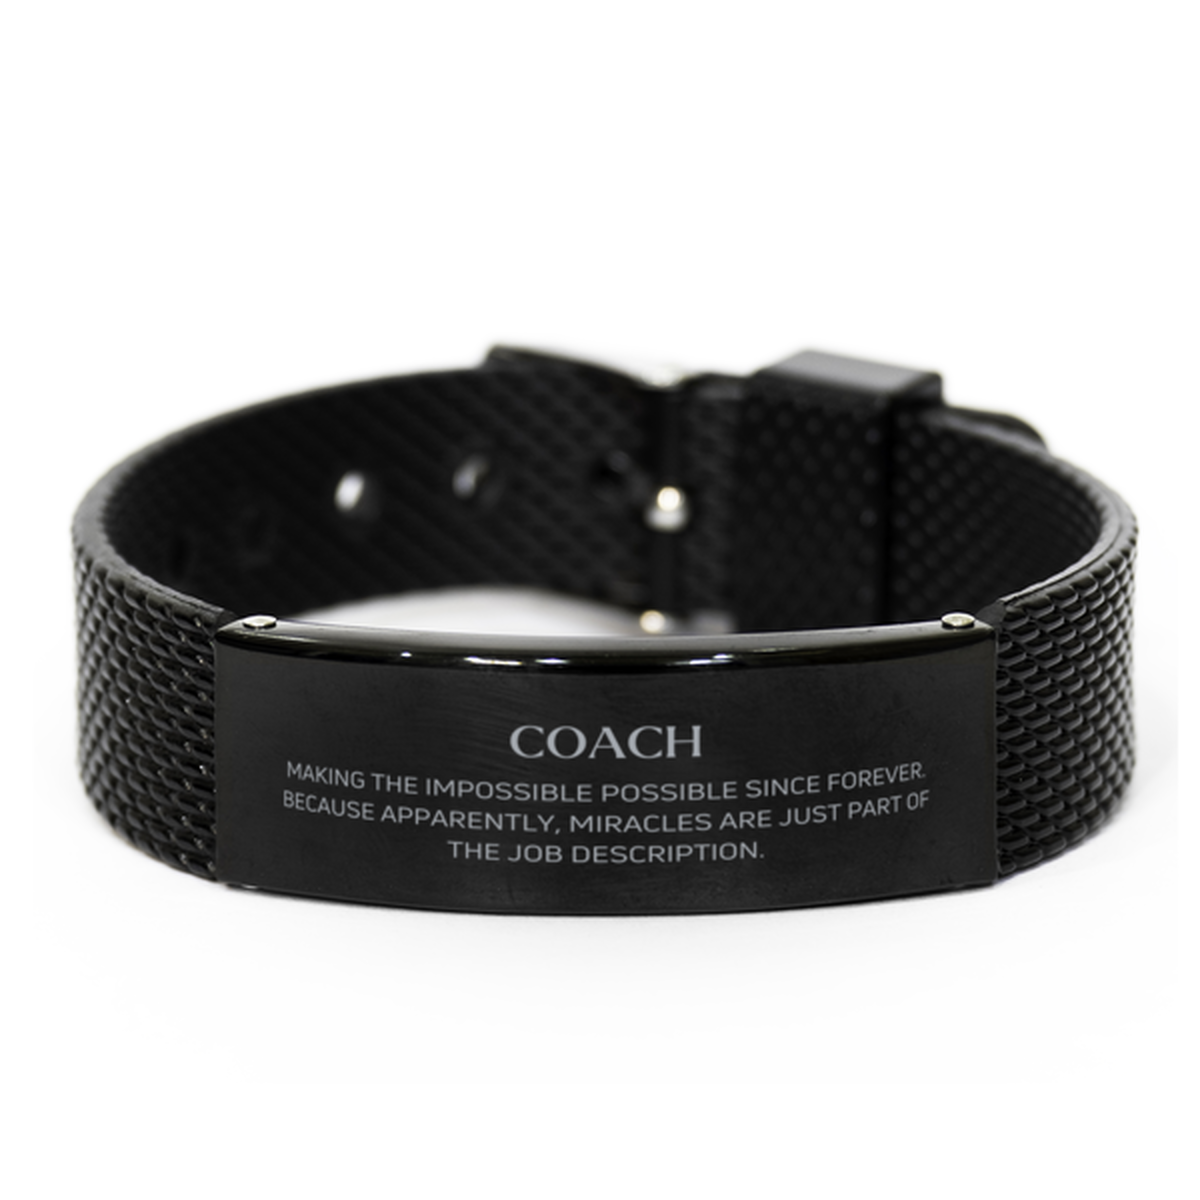 Funny Coach Gifts, Miracles are just part of the job description, Inspirational Birthday Black Shark Mesh Bracelet For Coach, Men, Women, Coworkers, Friends, Boss